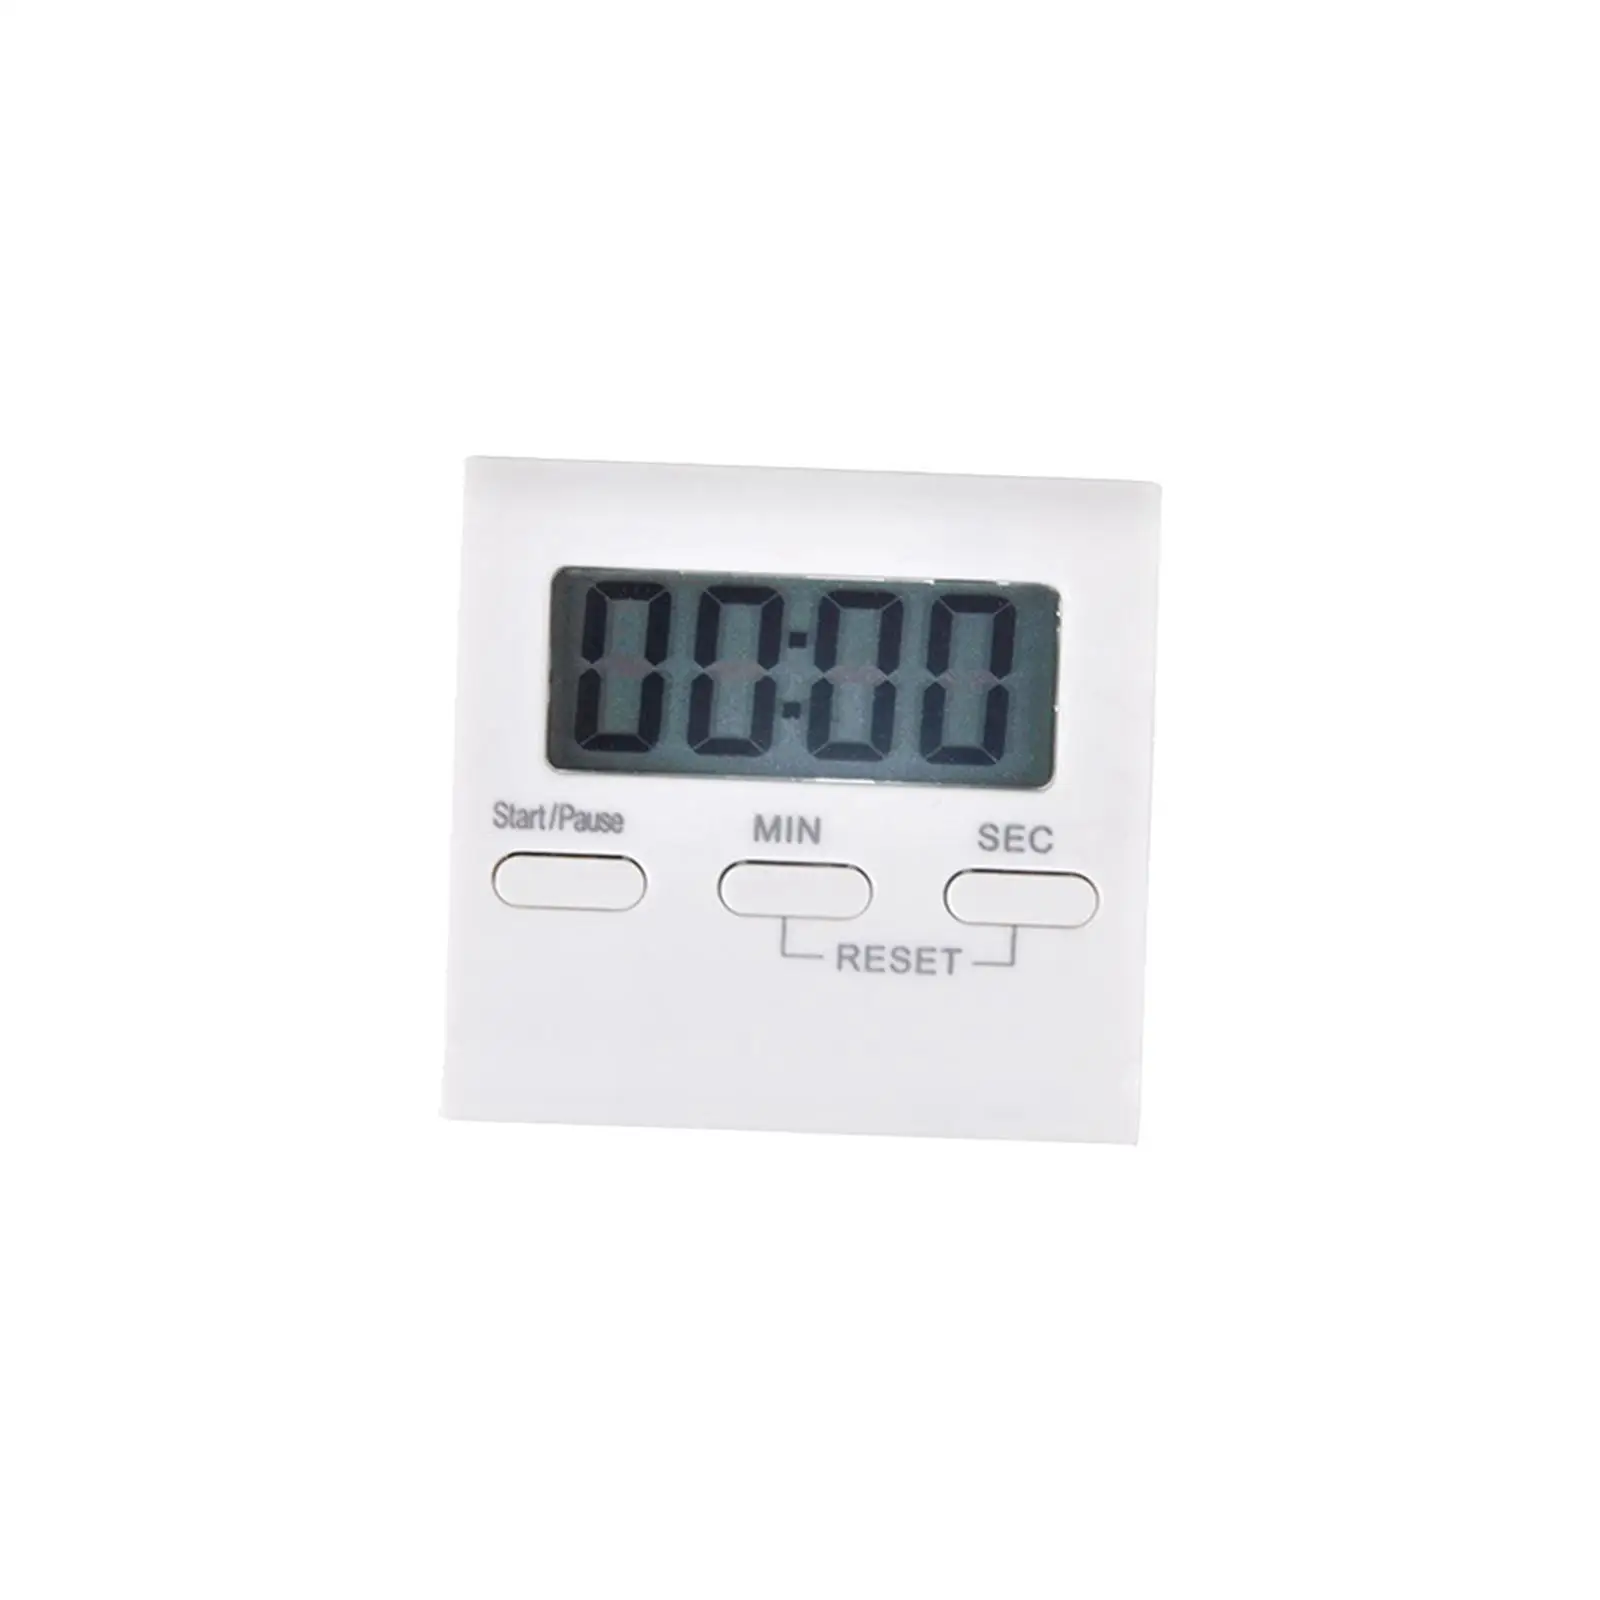 Cooking Timer Classroom Timer Cooking Supplies Multifunction Timing Clocks Kitchen Timer Baking Clock for Office Cooking Sports